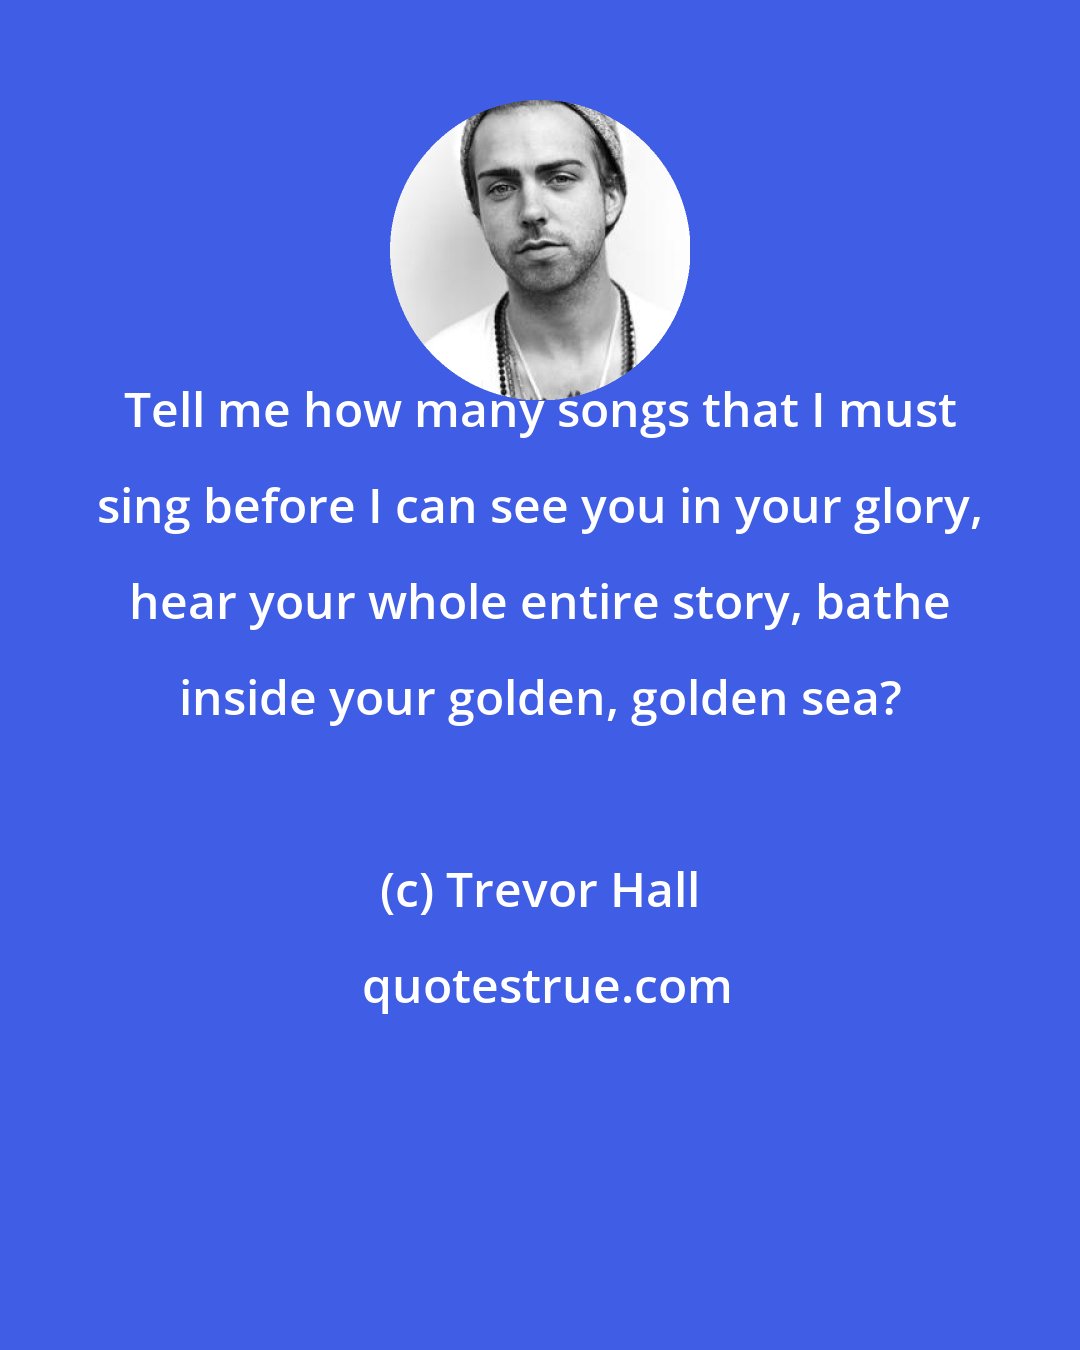 Trevor Hall: Tell me how many songs that I must sing before I can see you in your glory, hear your whole entire story, bathe inside your golden, golden sea?